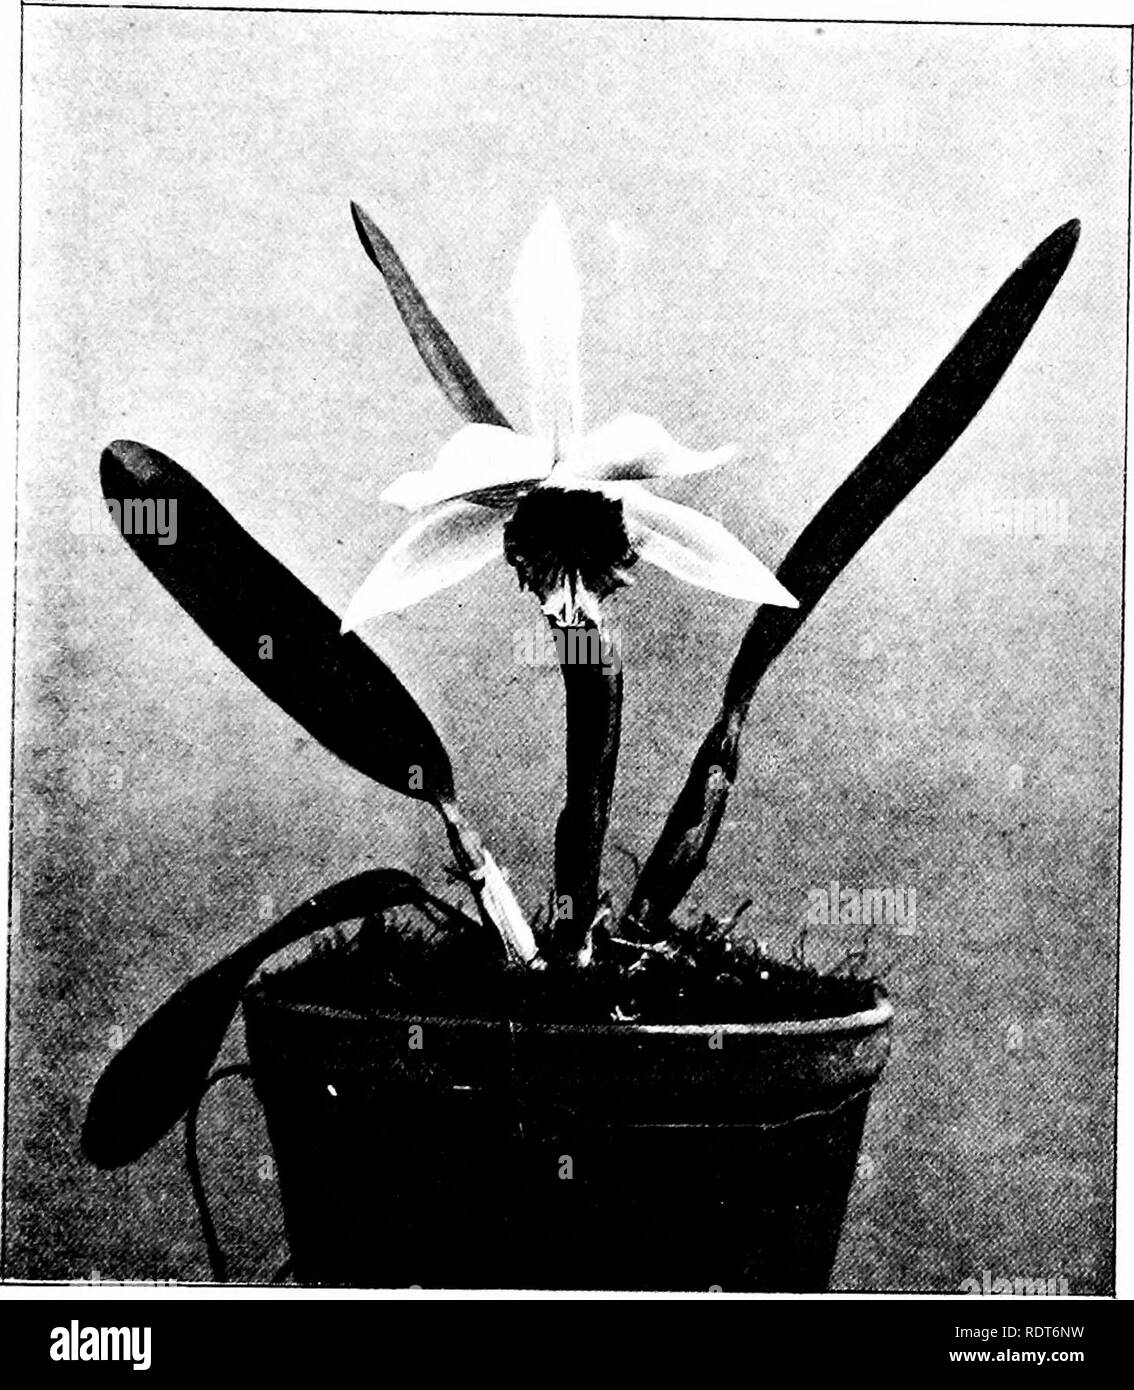 . The orchid stud-book: an enumeration of hybrid orchids of artificial origin, with their parents, raisers, date of first flowering, references to descriptions and figures, and synonymy. With an historical introduction and 120 figures and a chapter on hybridising and raising orchids from seed. Orchids. Part 11.] THE ORCHID STUD-BOOK. 89 « 3. L x cinnabrosa (cinnabarina 2 x tenebrosa), O.R. 1898, 189; Dict.Ic. 0. Lael. hyb. t. 9.—Charlesworth, 1898. L.  Halevy (tenebrosa 5 ), J. S. H. Fi: 1902, 651.—Maron. i. L. X Coronet (cinnabarina J x harpophylla), G.C. 1902, i. 151 ; O.R. 1902, 157—Charle Stock Photo